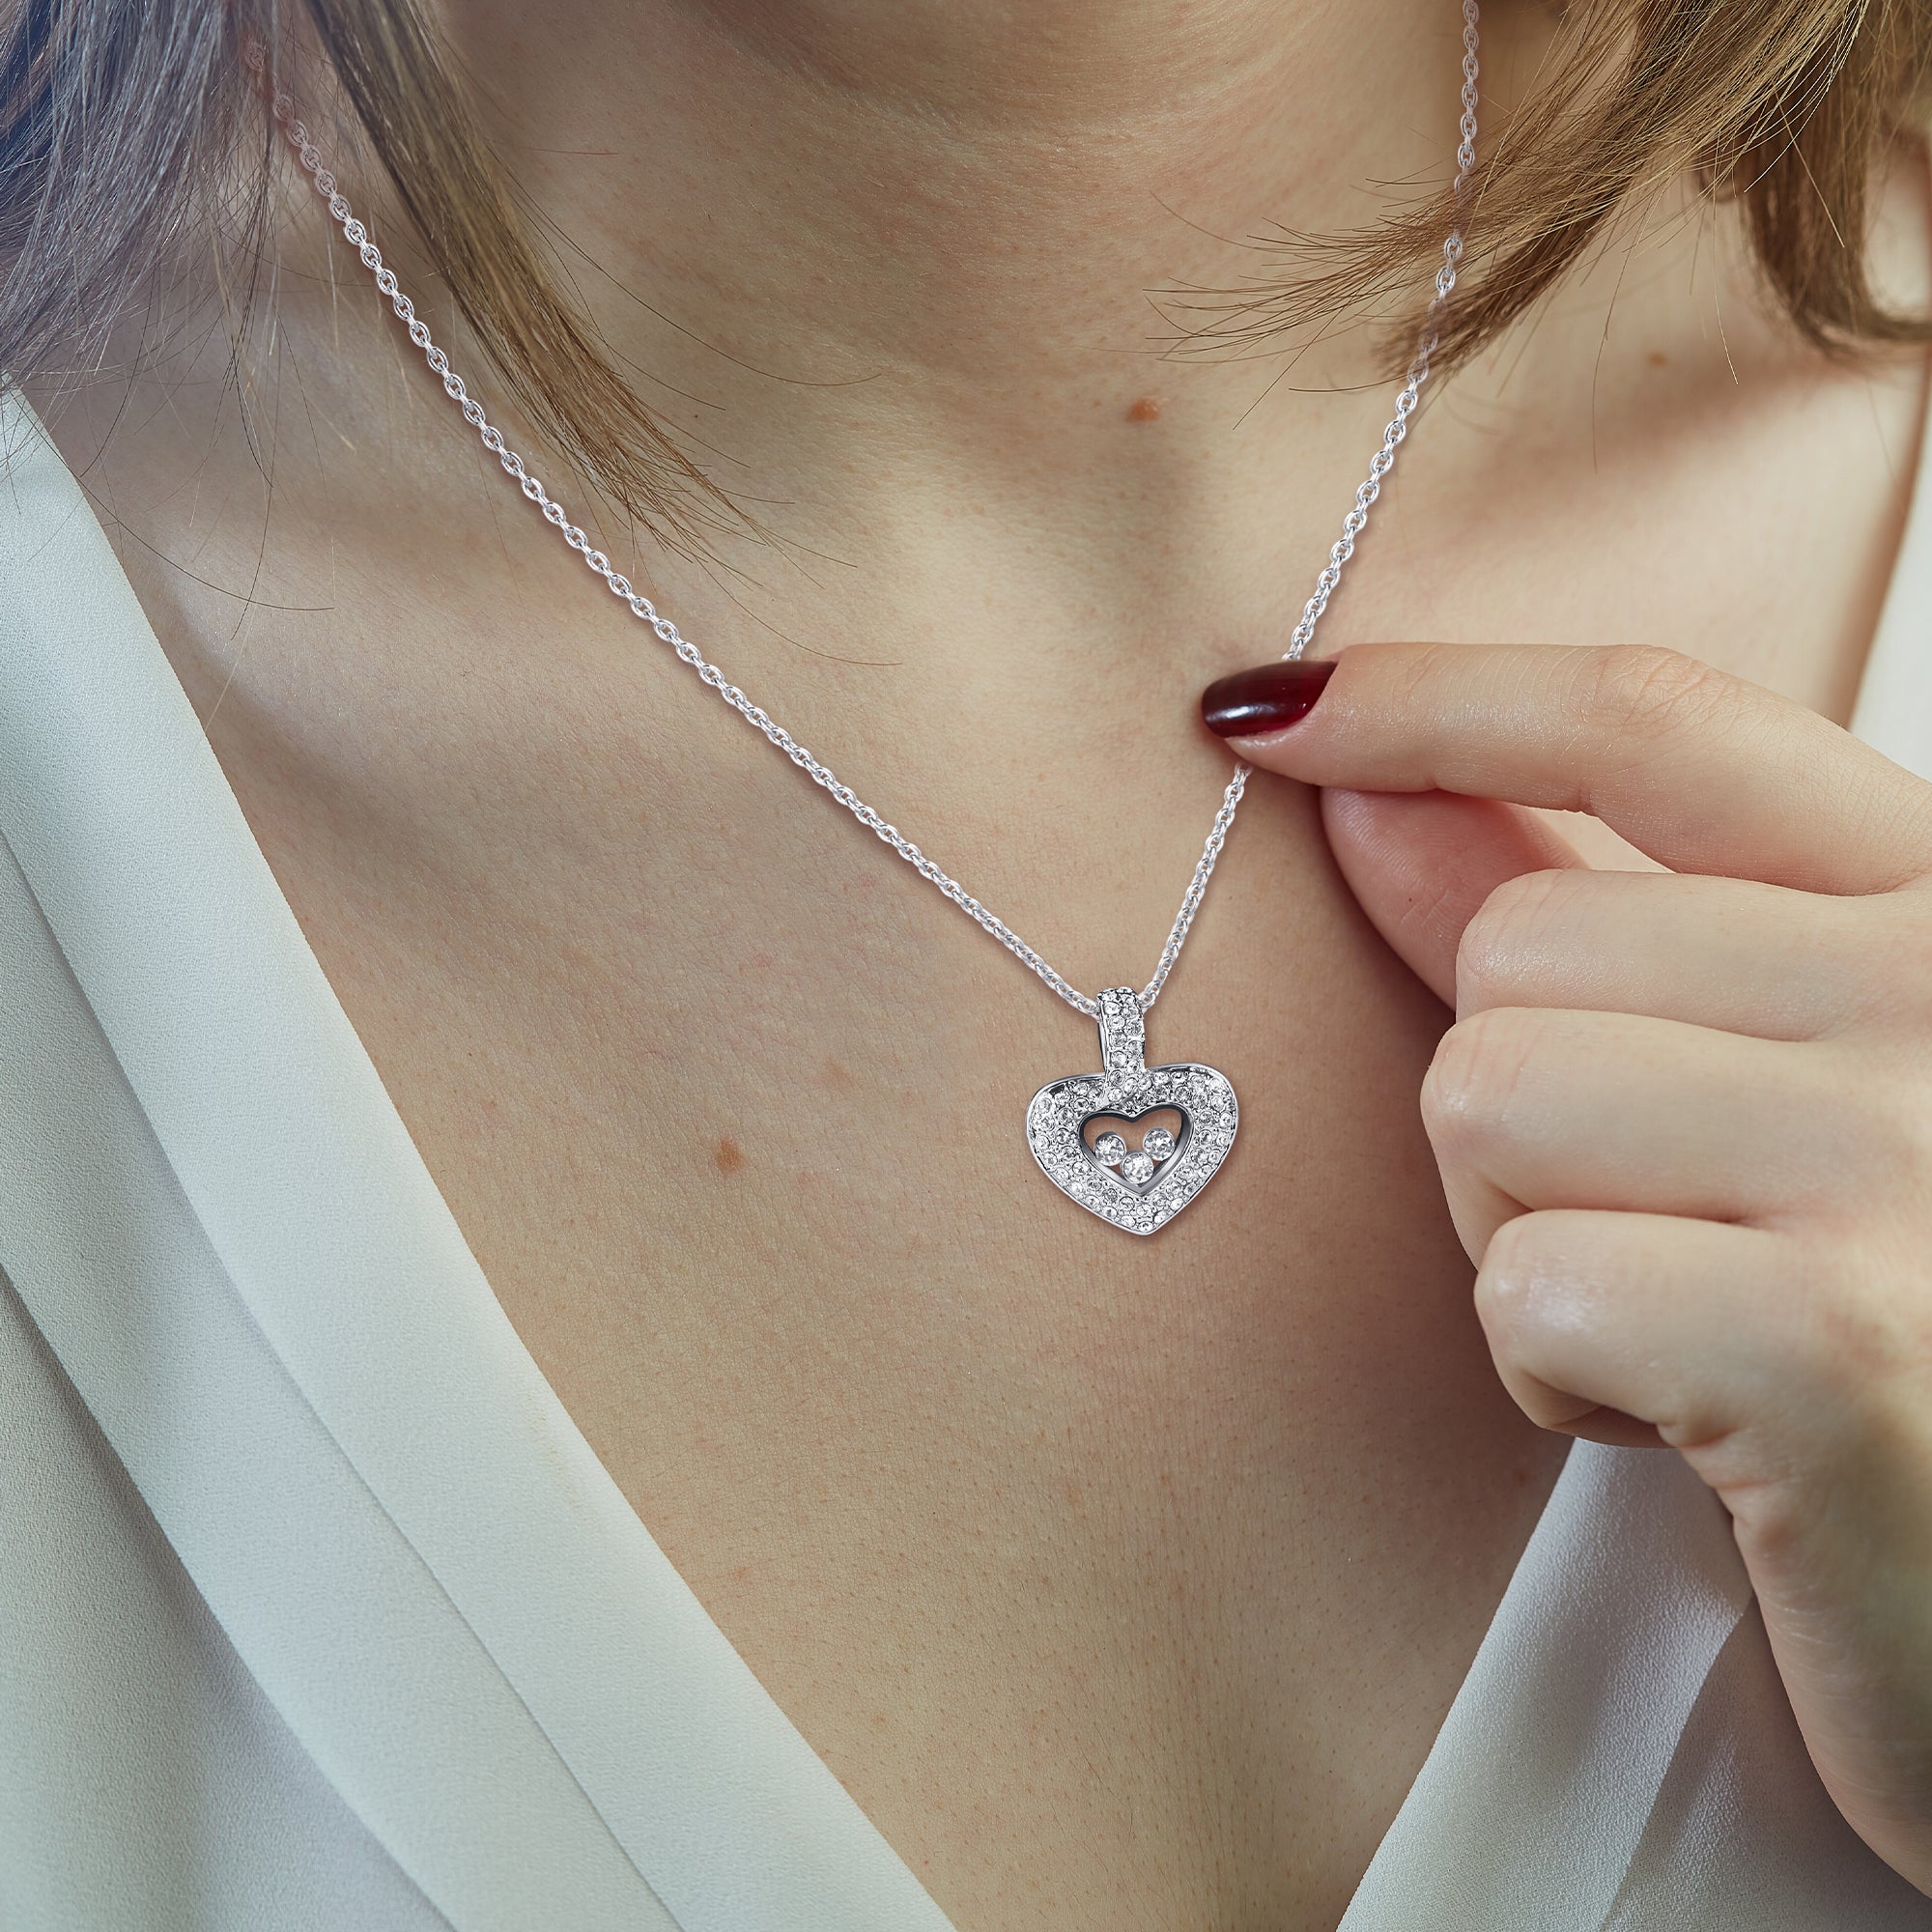 To My Daughter-in-Law - I'll Stay There Forever- Tryndi Floating Heart Necklace